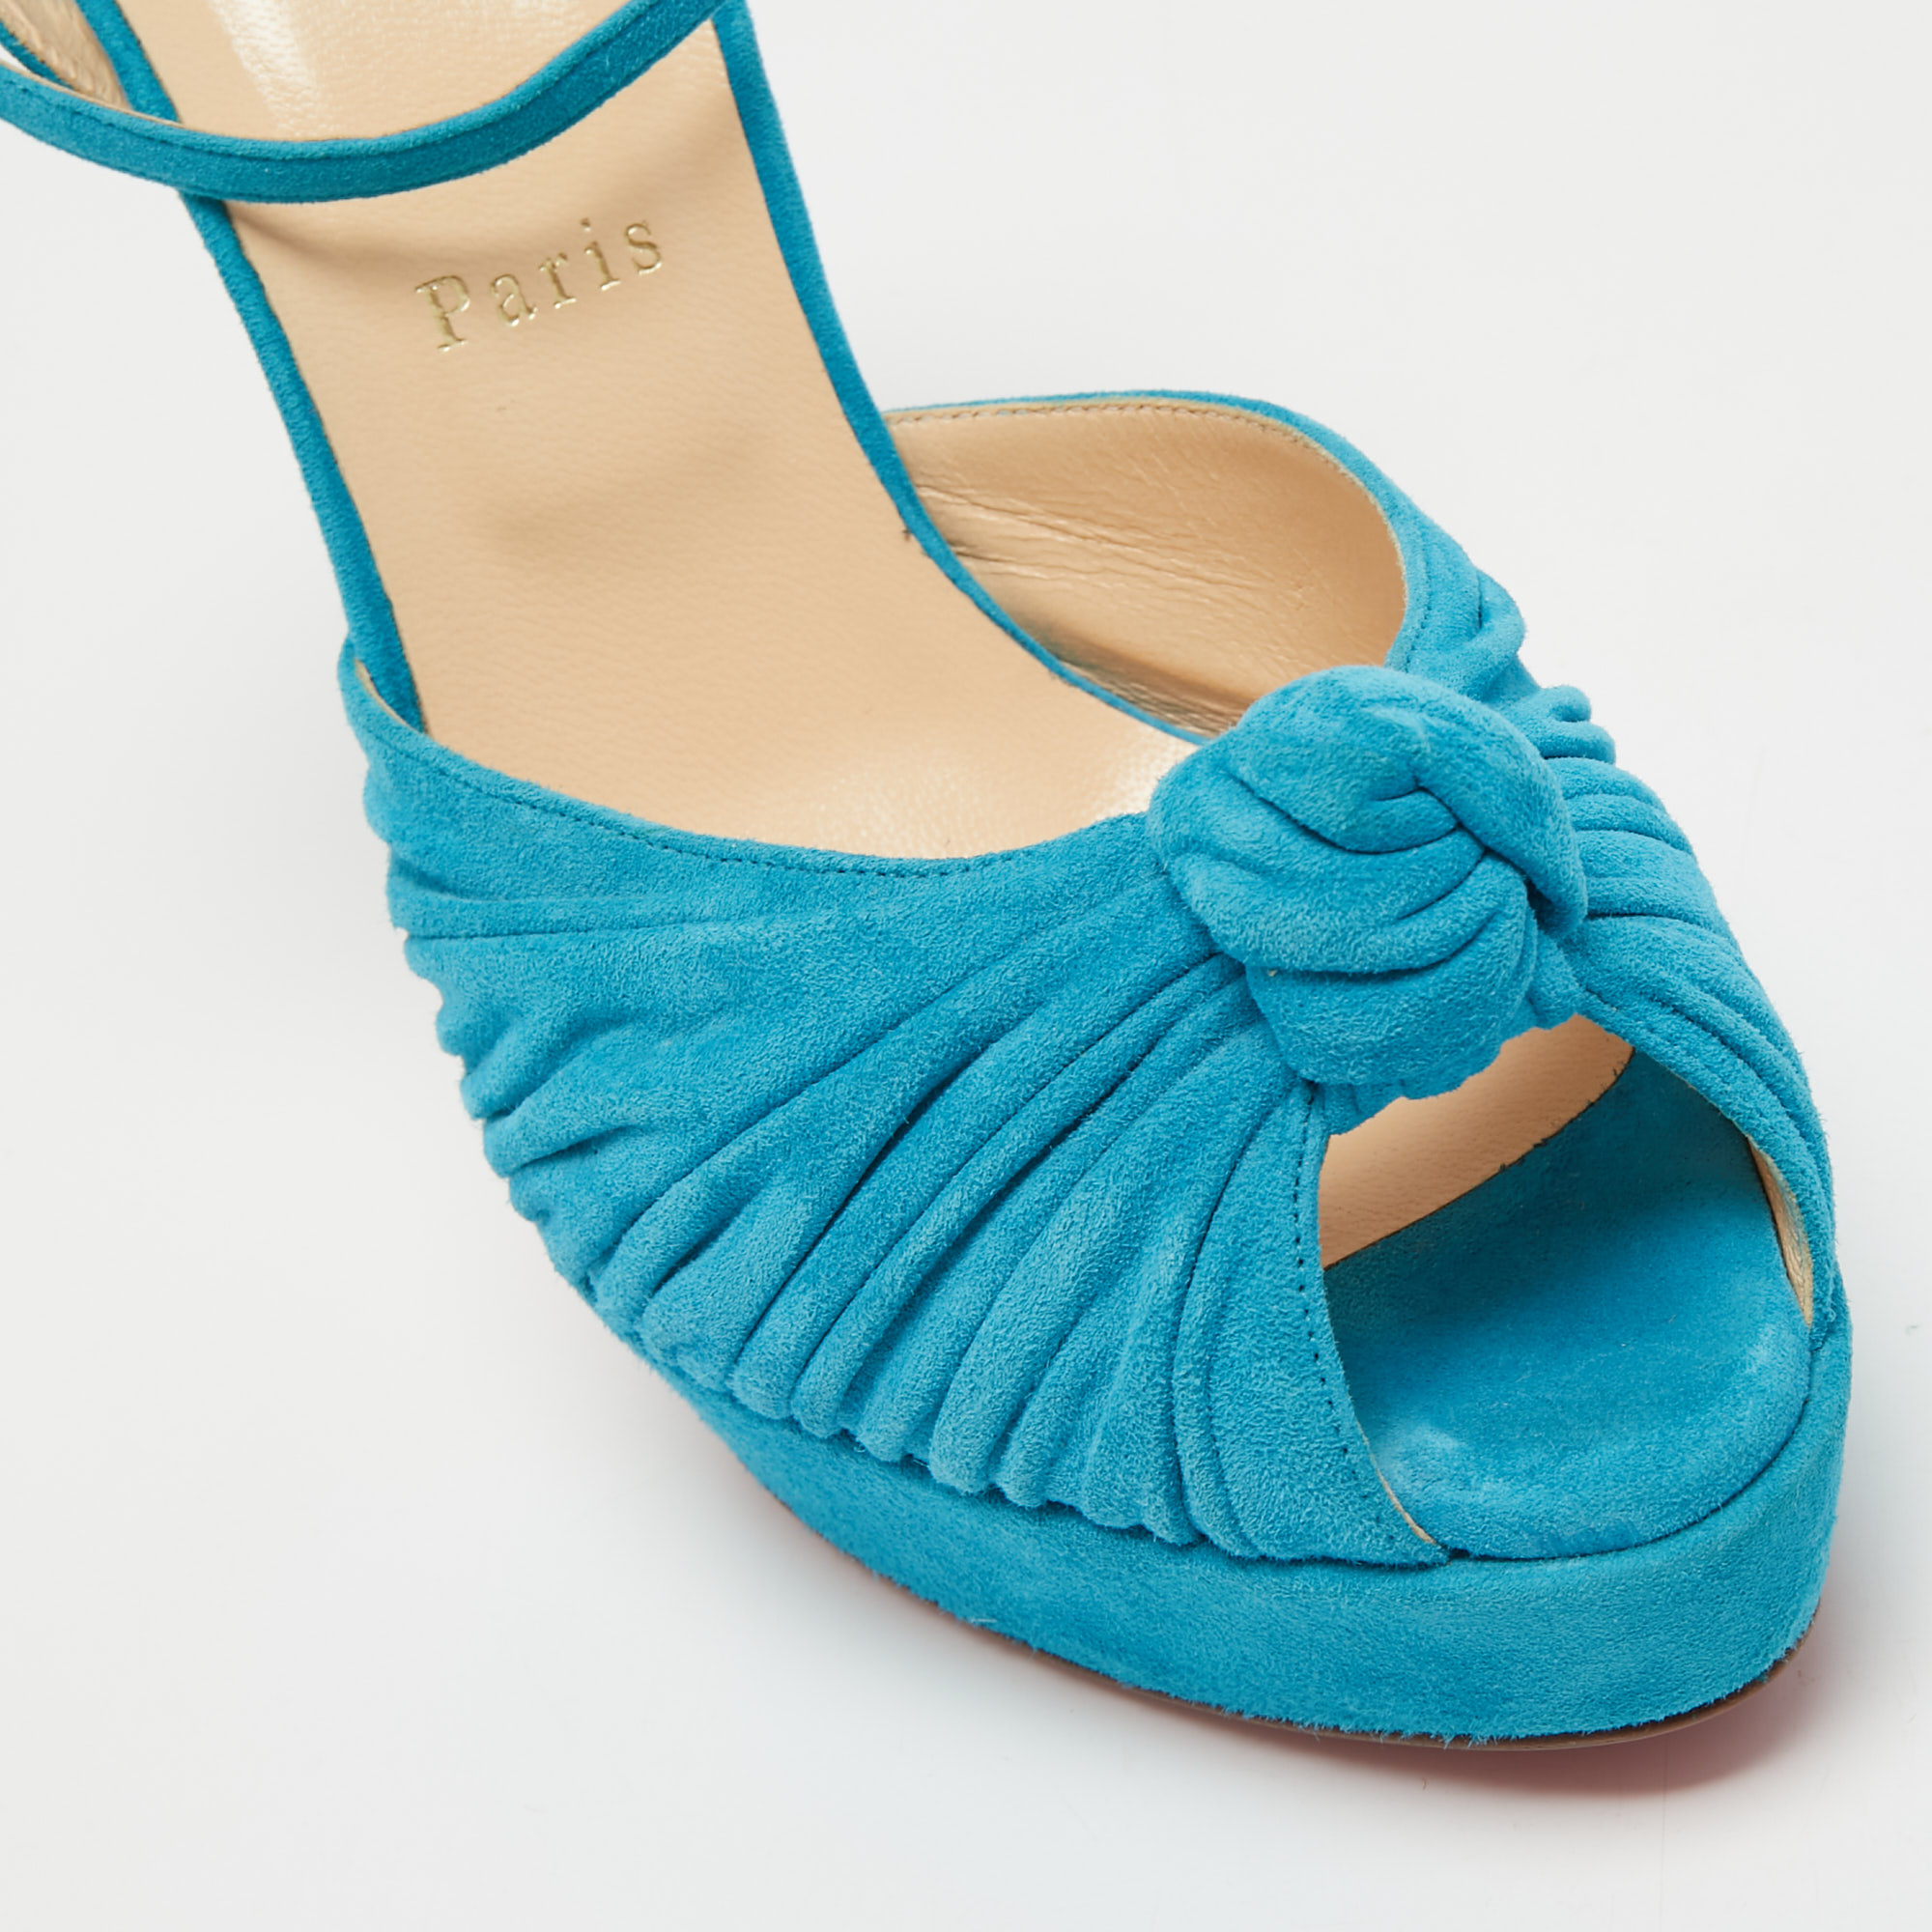 Christian Louboutin Blue Knotted Suede Greissimo Ankle Strap Sandals Size 40.5